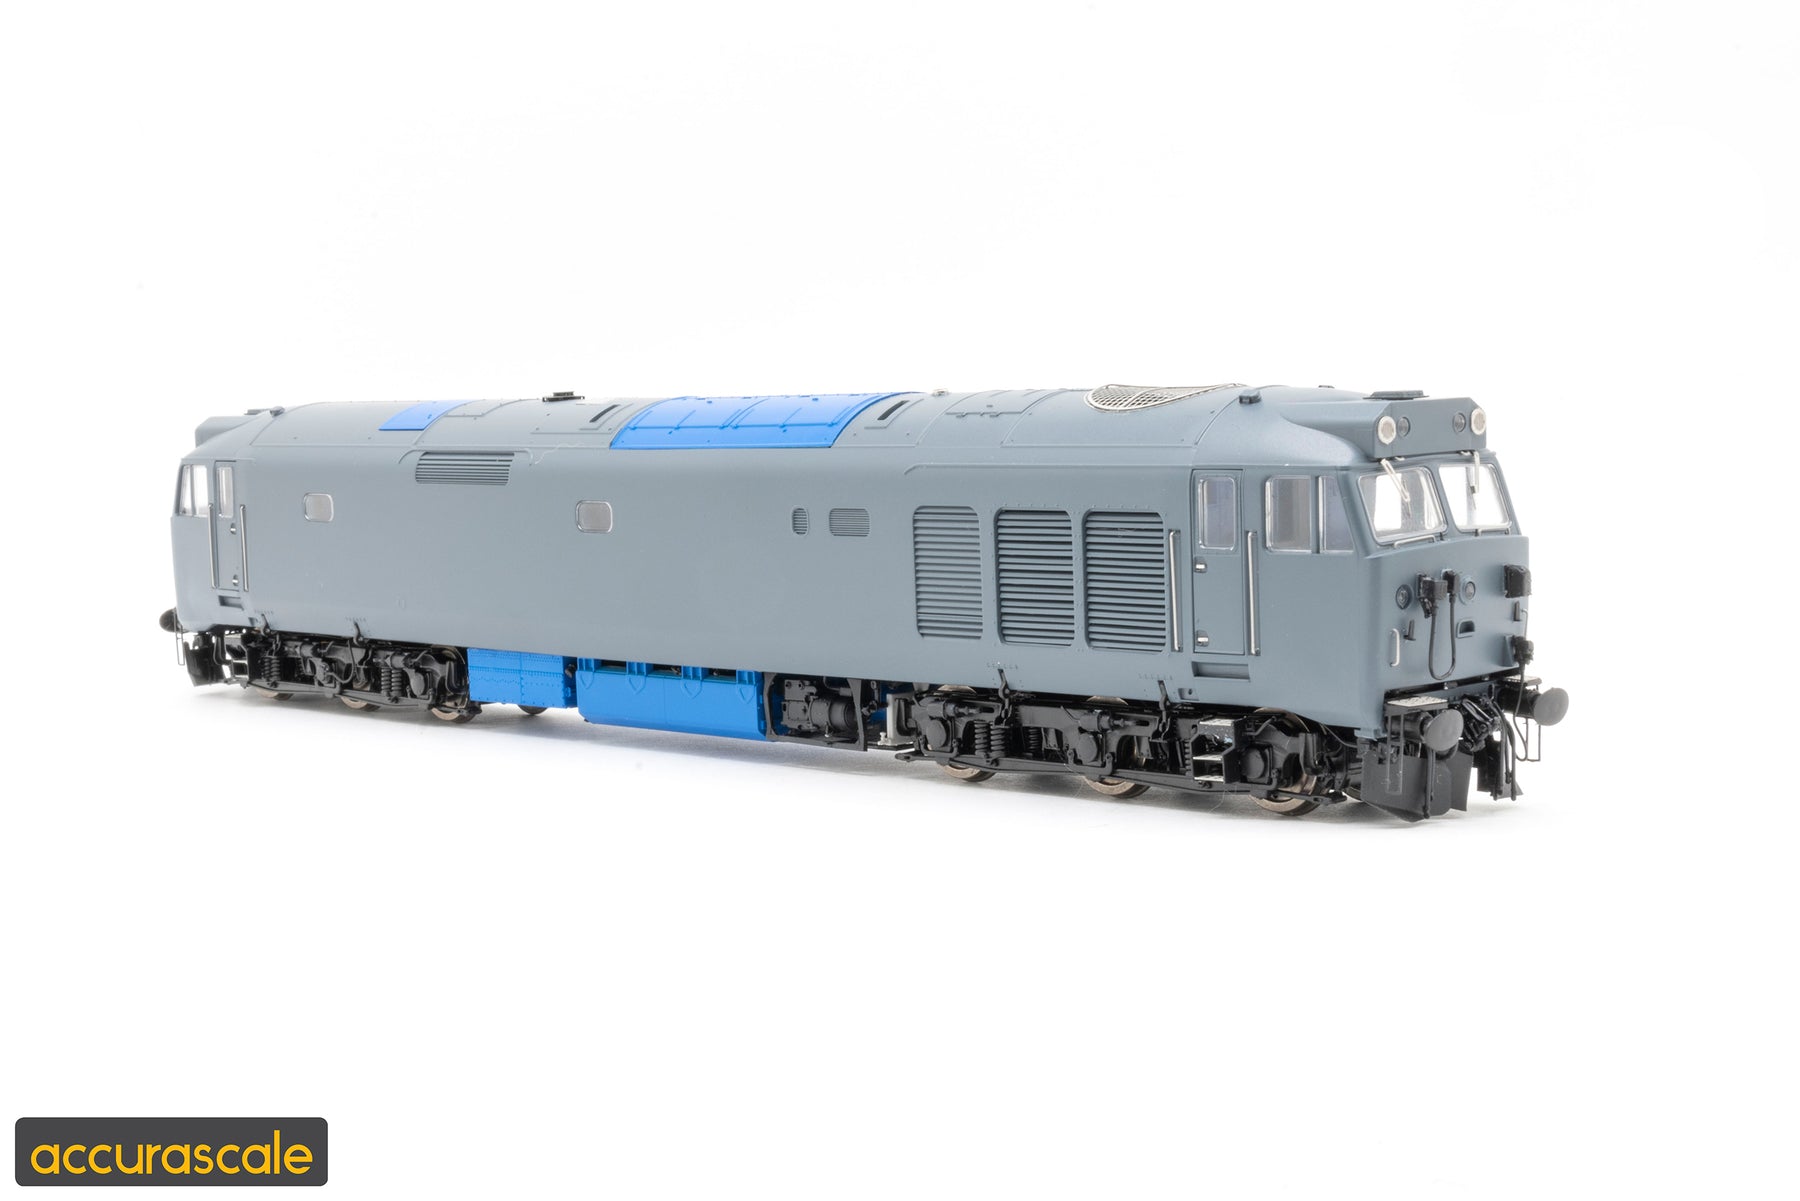 My Lordzzz - A First Look At Our Class 50